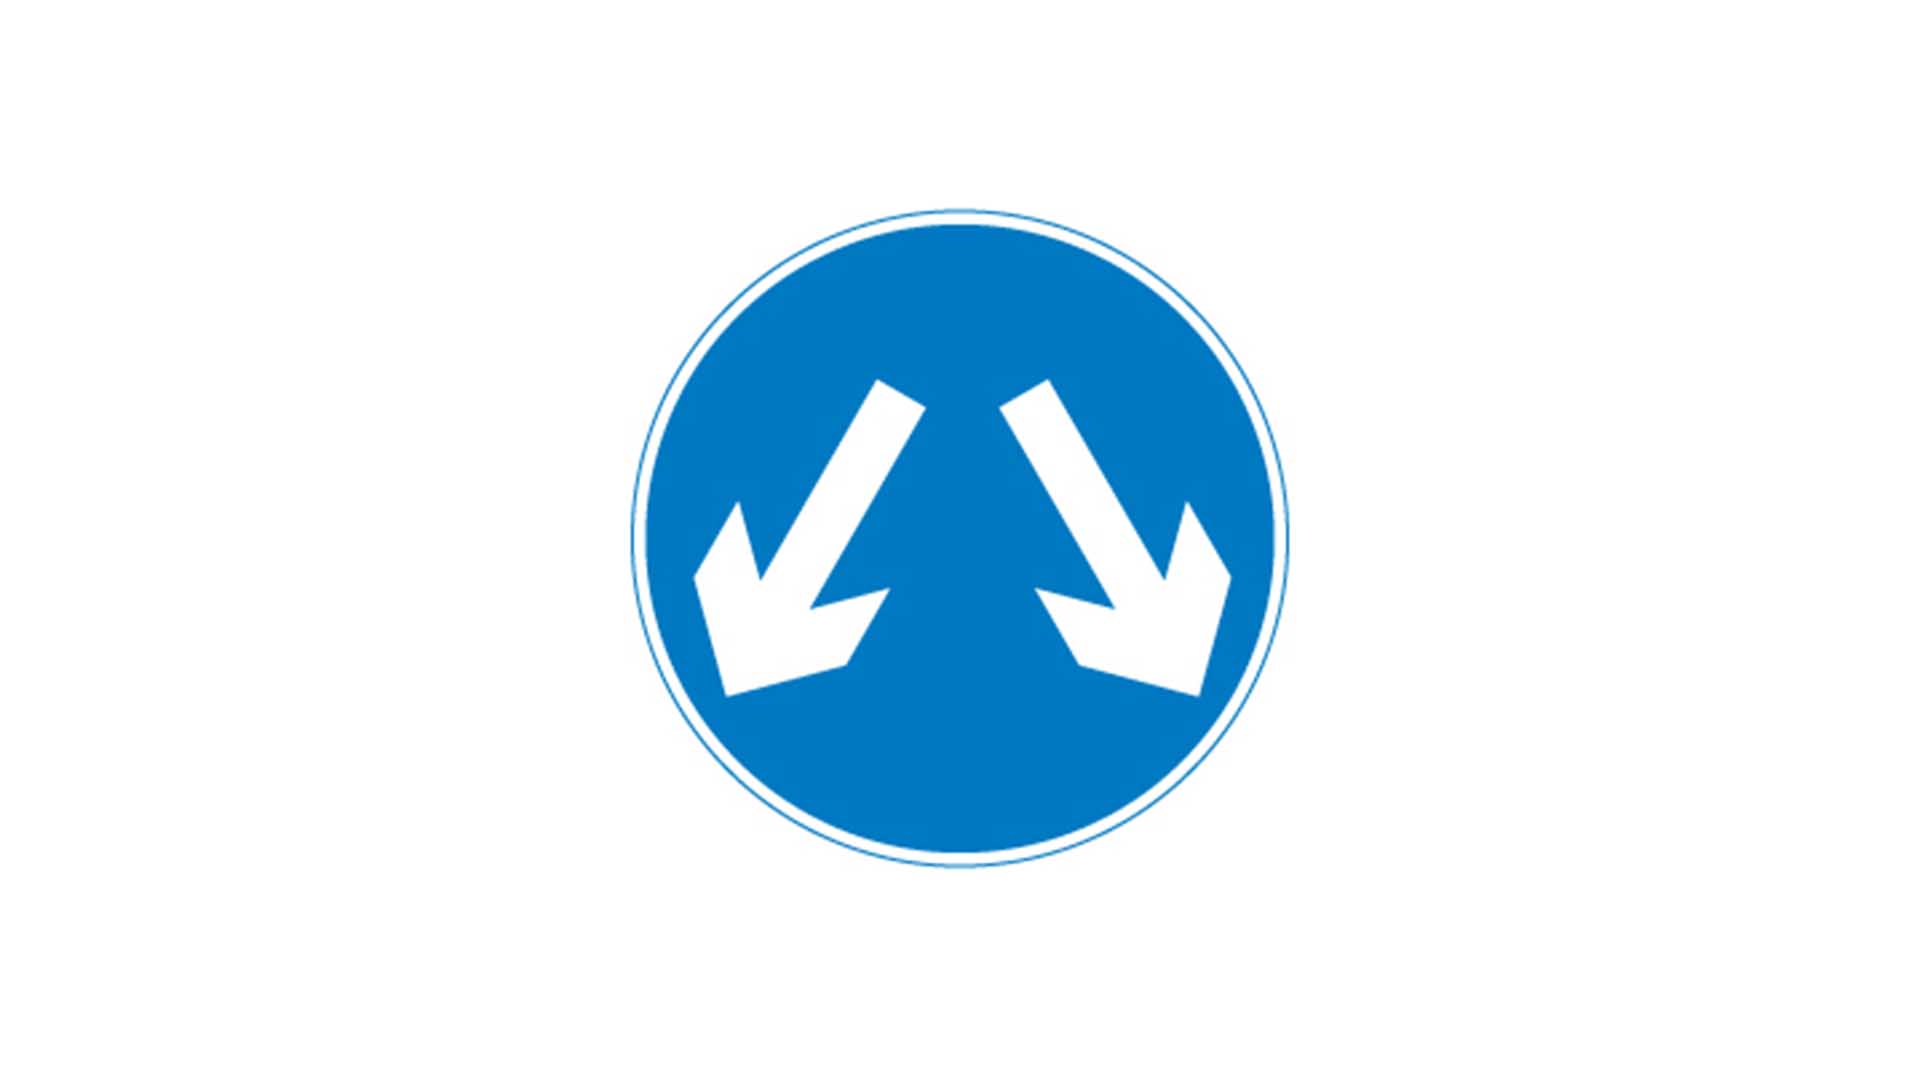 Pass either side road sign